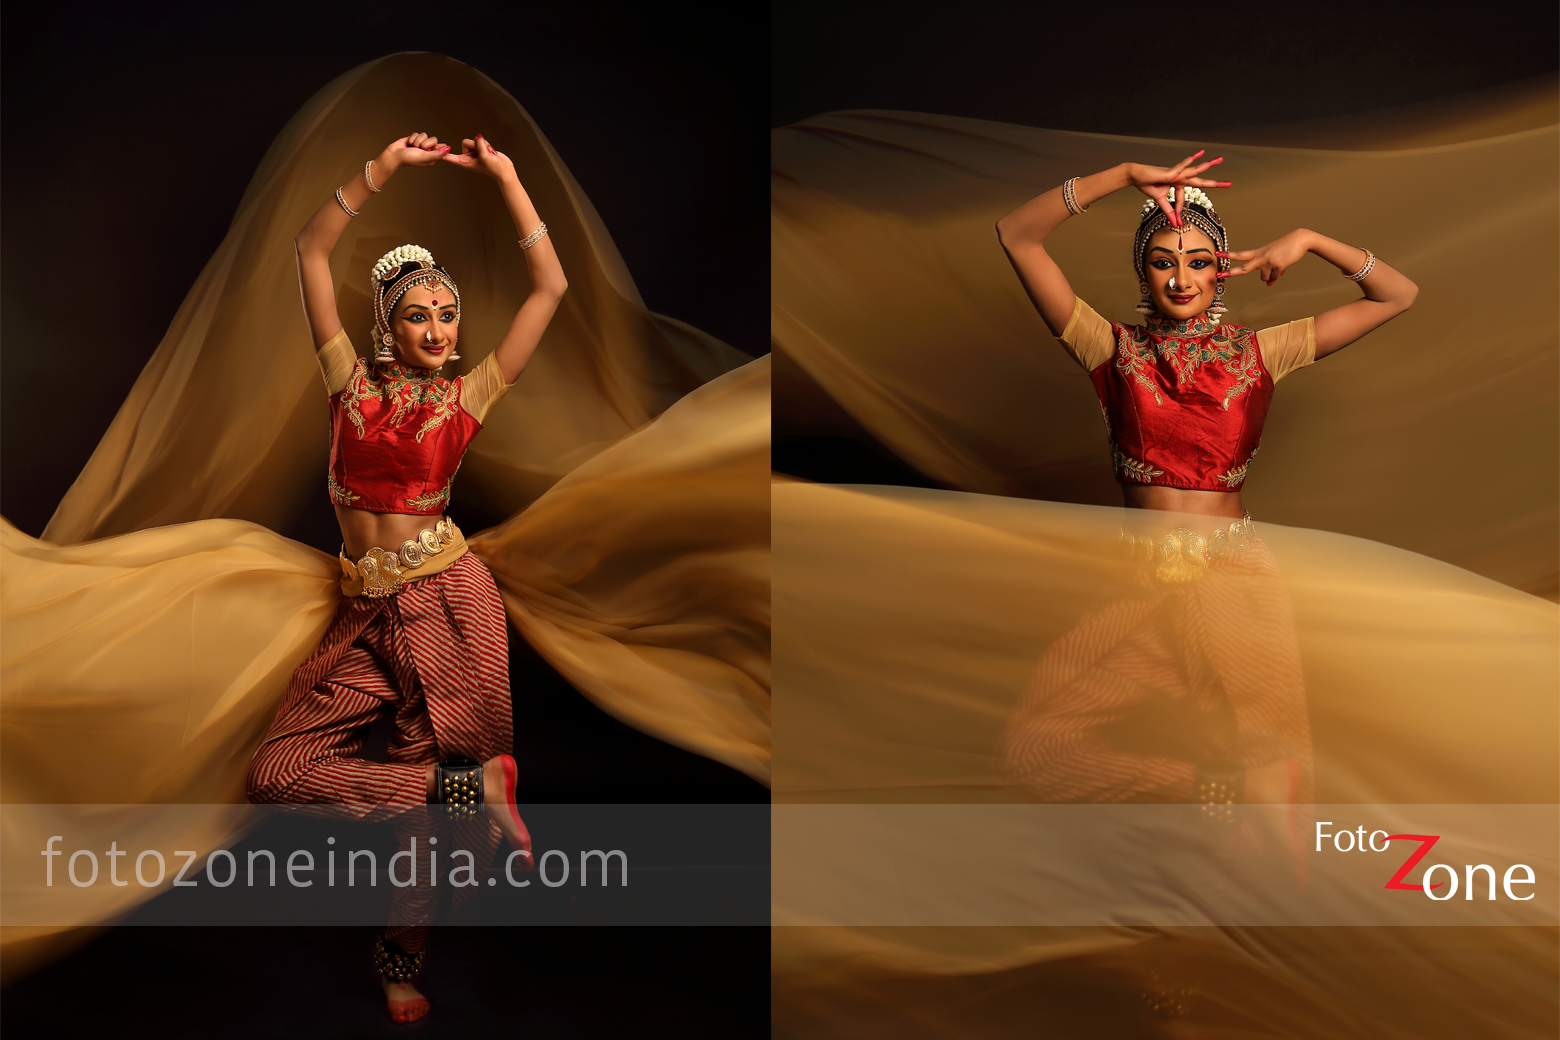 Portrait Of Bharatanatyam Dancer With Multiple Mudras Over White Background  High-Res Stock Photo - Getty Images